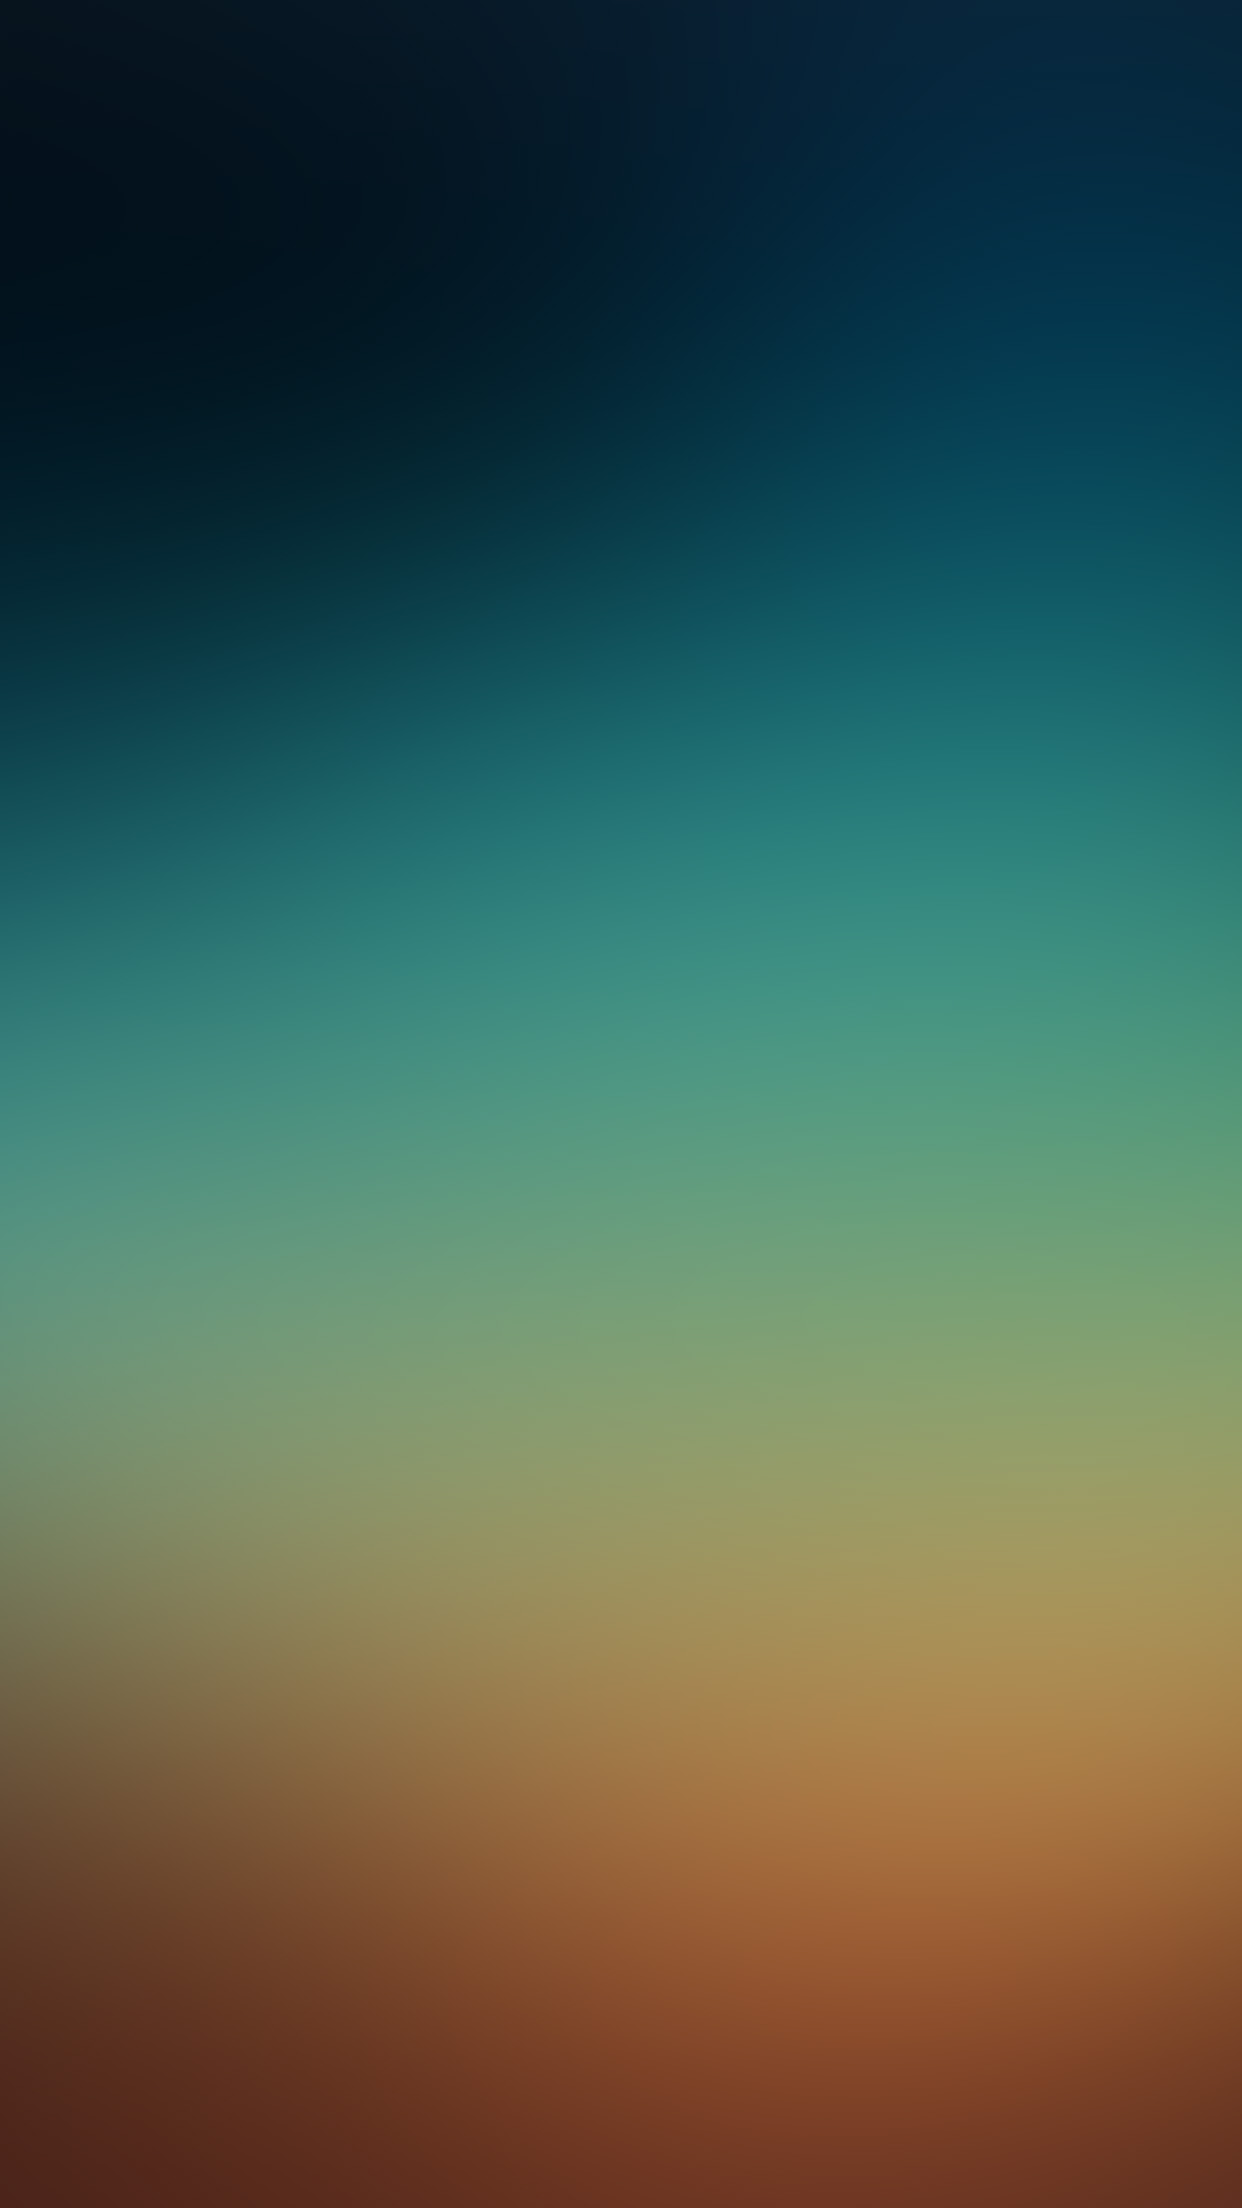 Abstract Morning Gradation Blur Android wallpaper